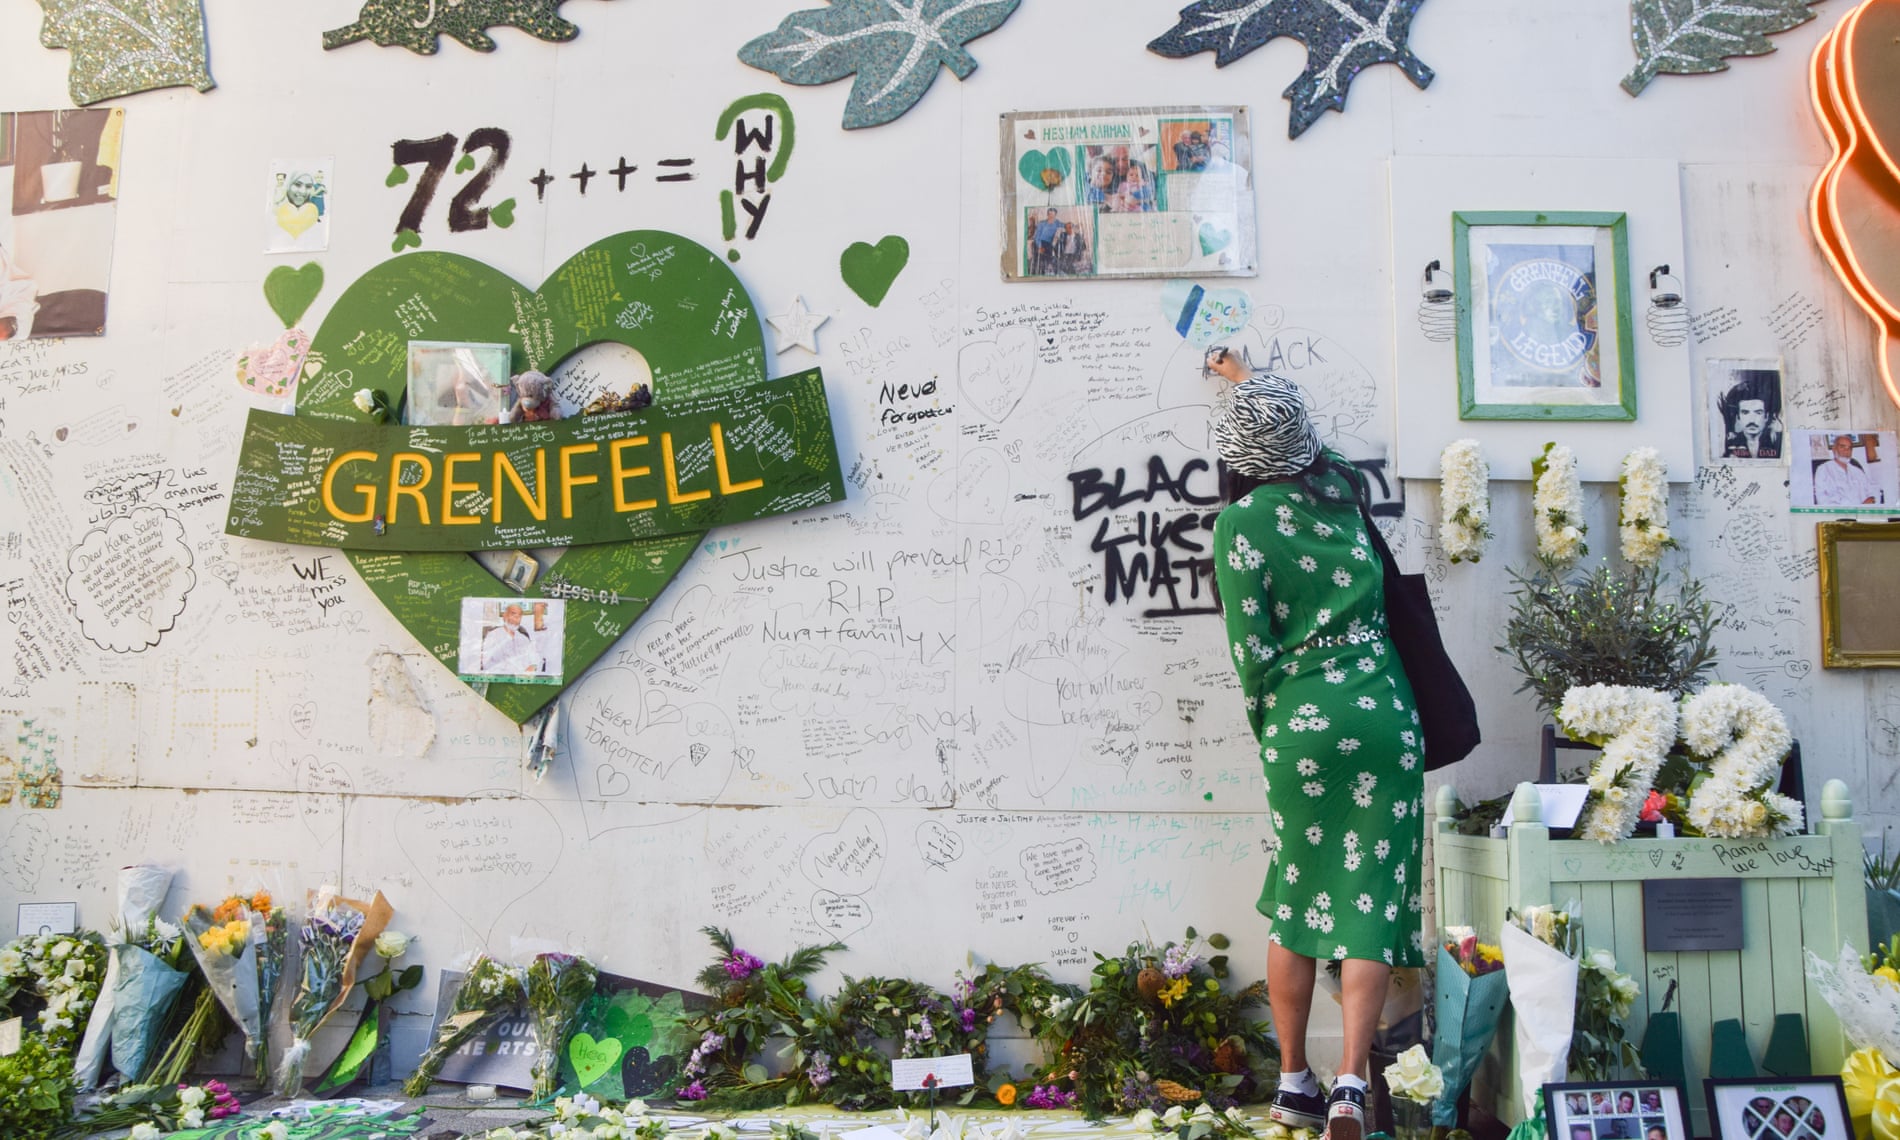 A memorial of the Grenfell Tower disaster earlier this summer.